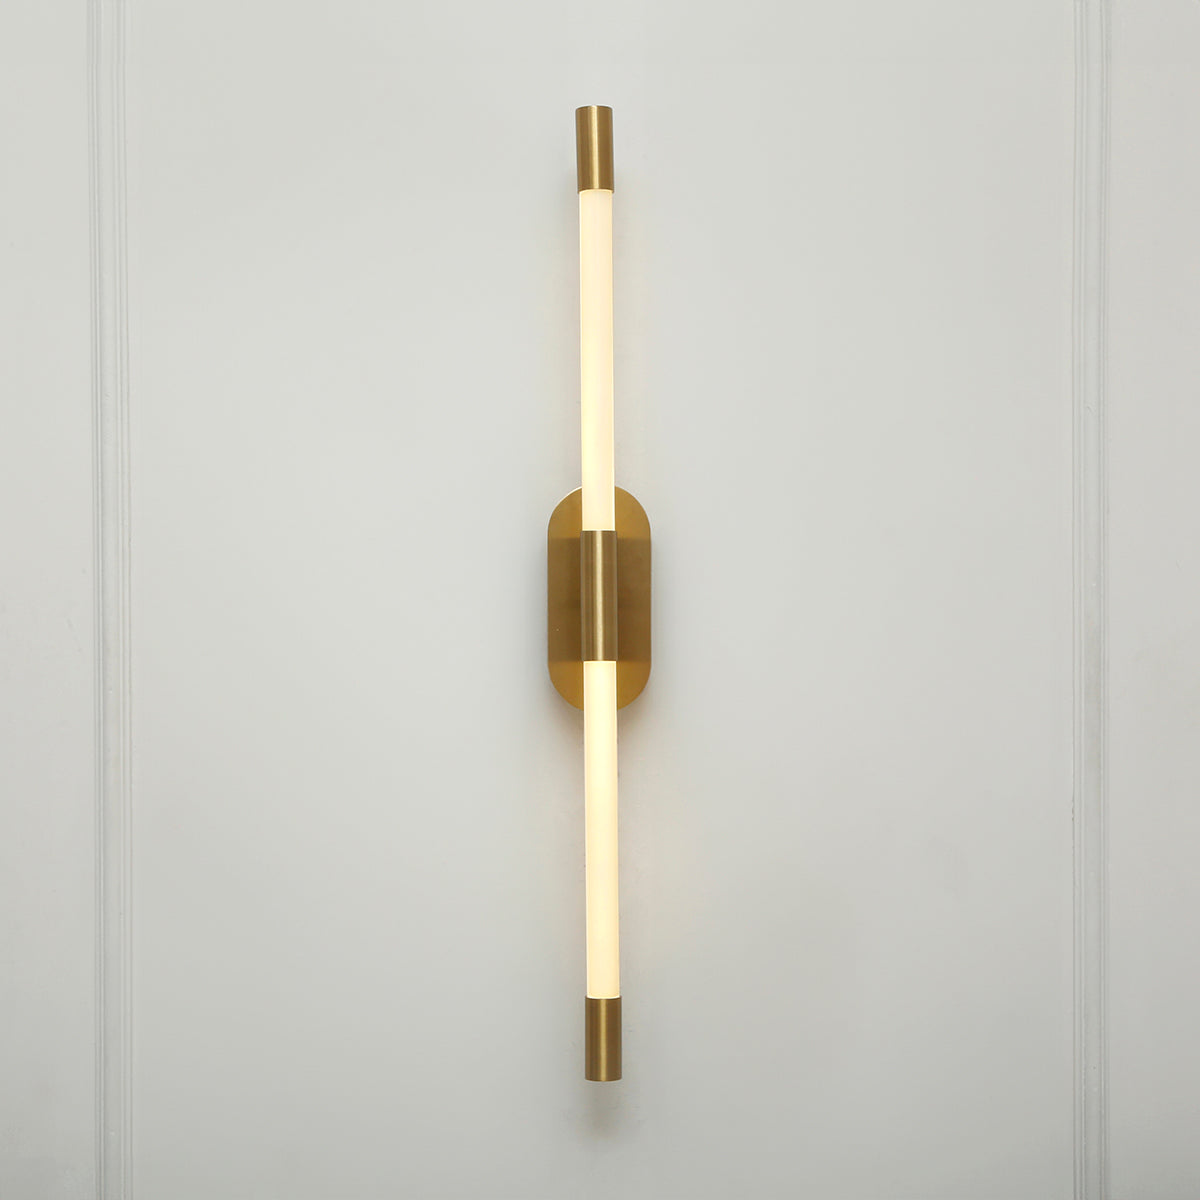 Shop Tall Claims LED Wall Light Online